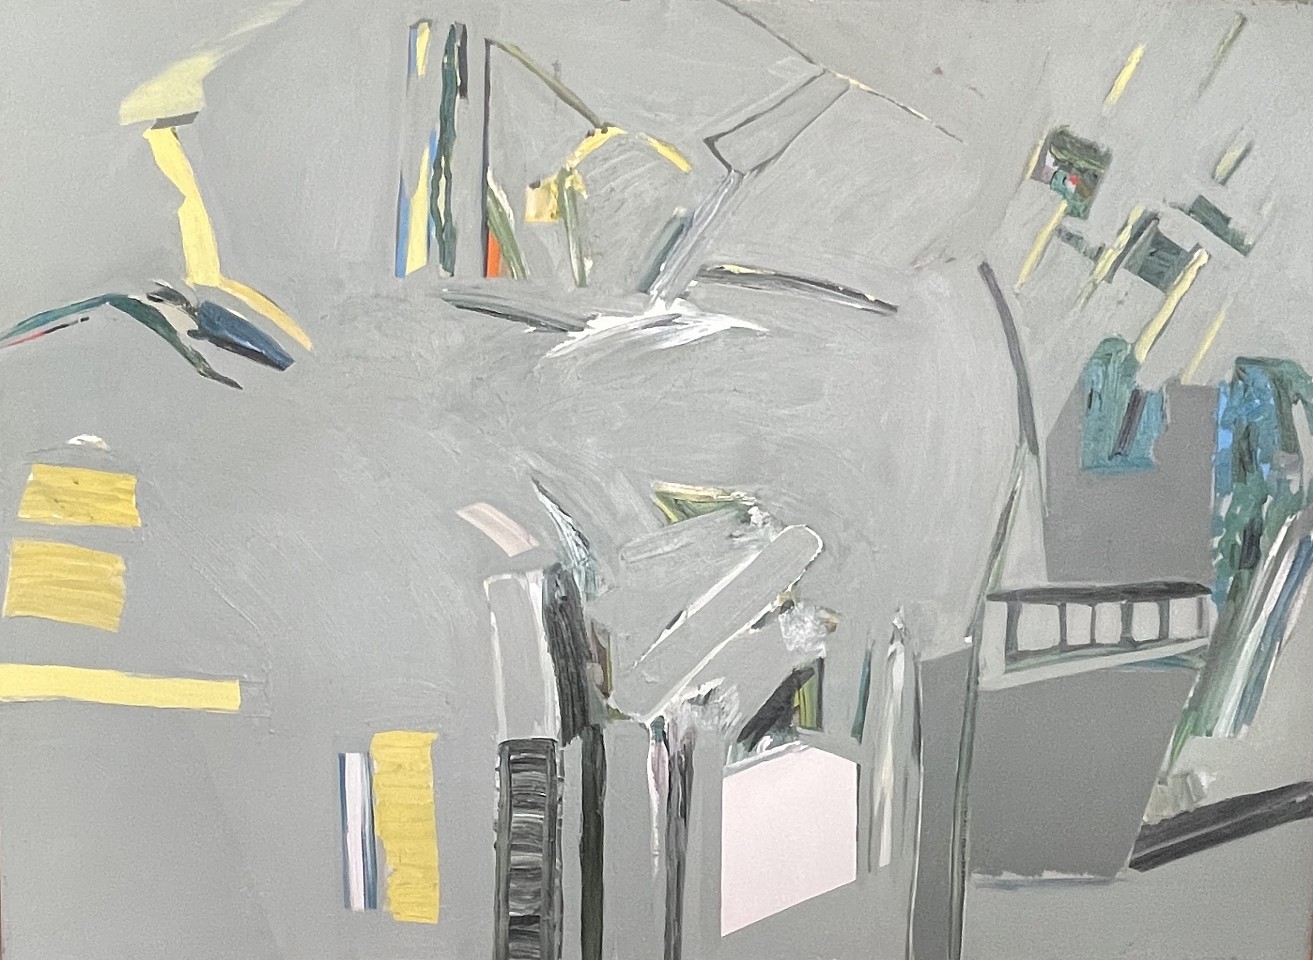 Angelo Ippolito, Landscape with Grey, 1977
Oil on canvas, 47 x 64 1/2 in.
IPP015